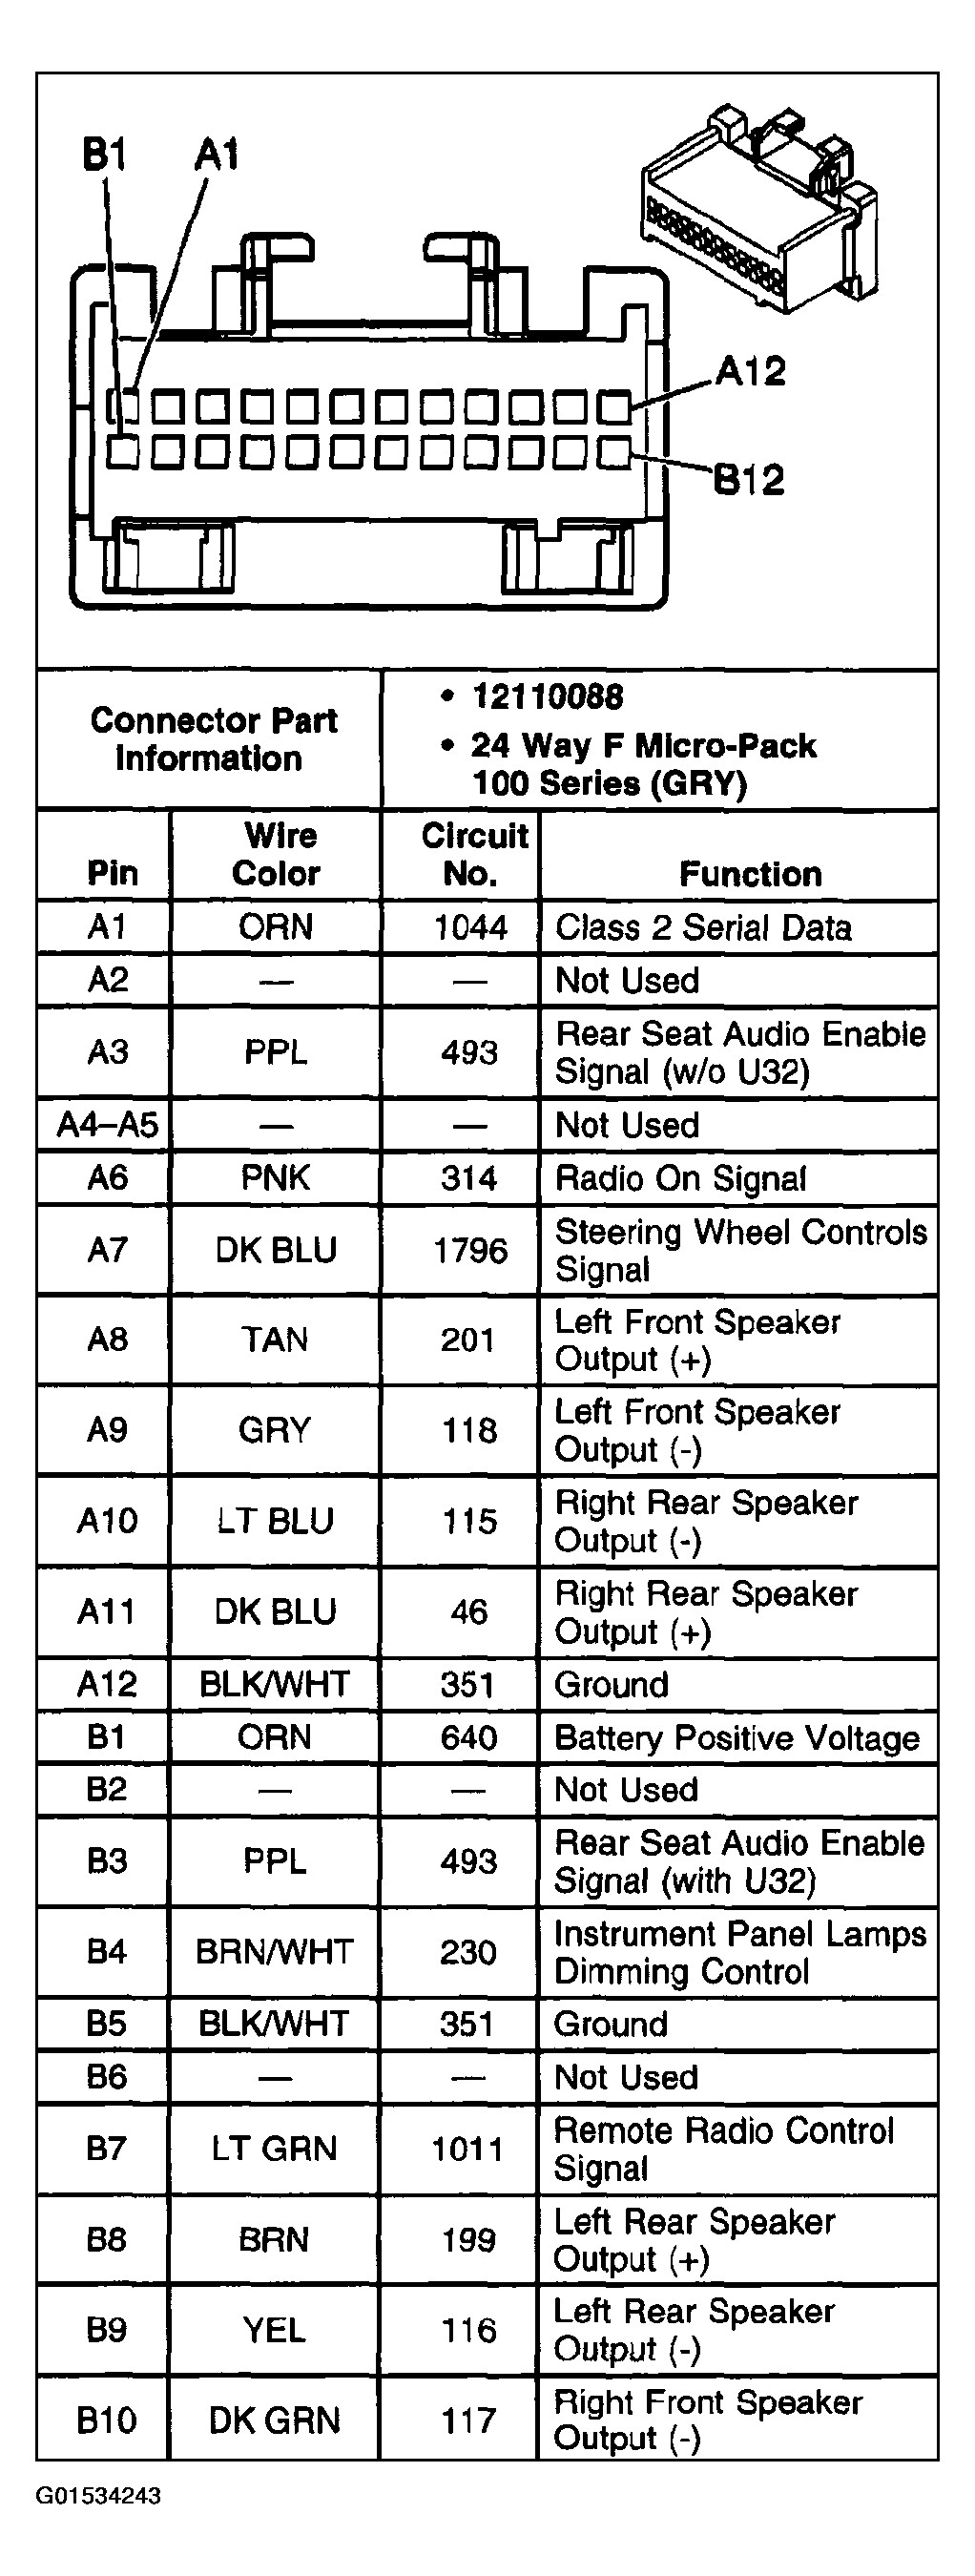 2000 Chevy Impala Stereo Wiring Diagram from mainetreasurechest.com